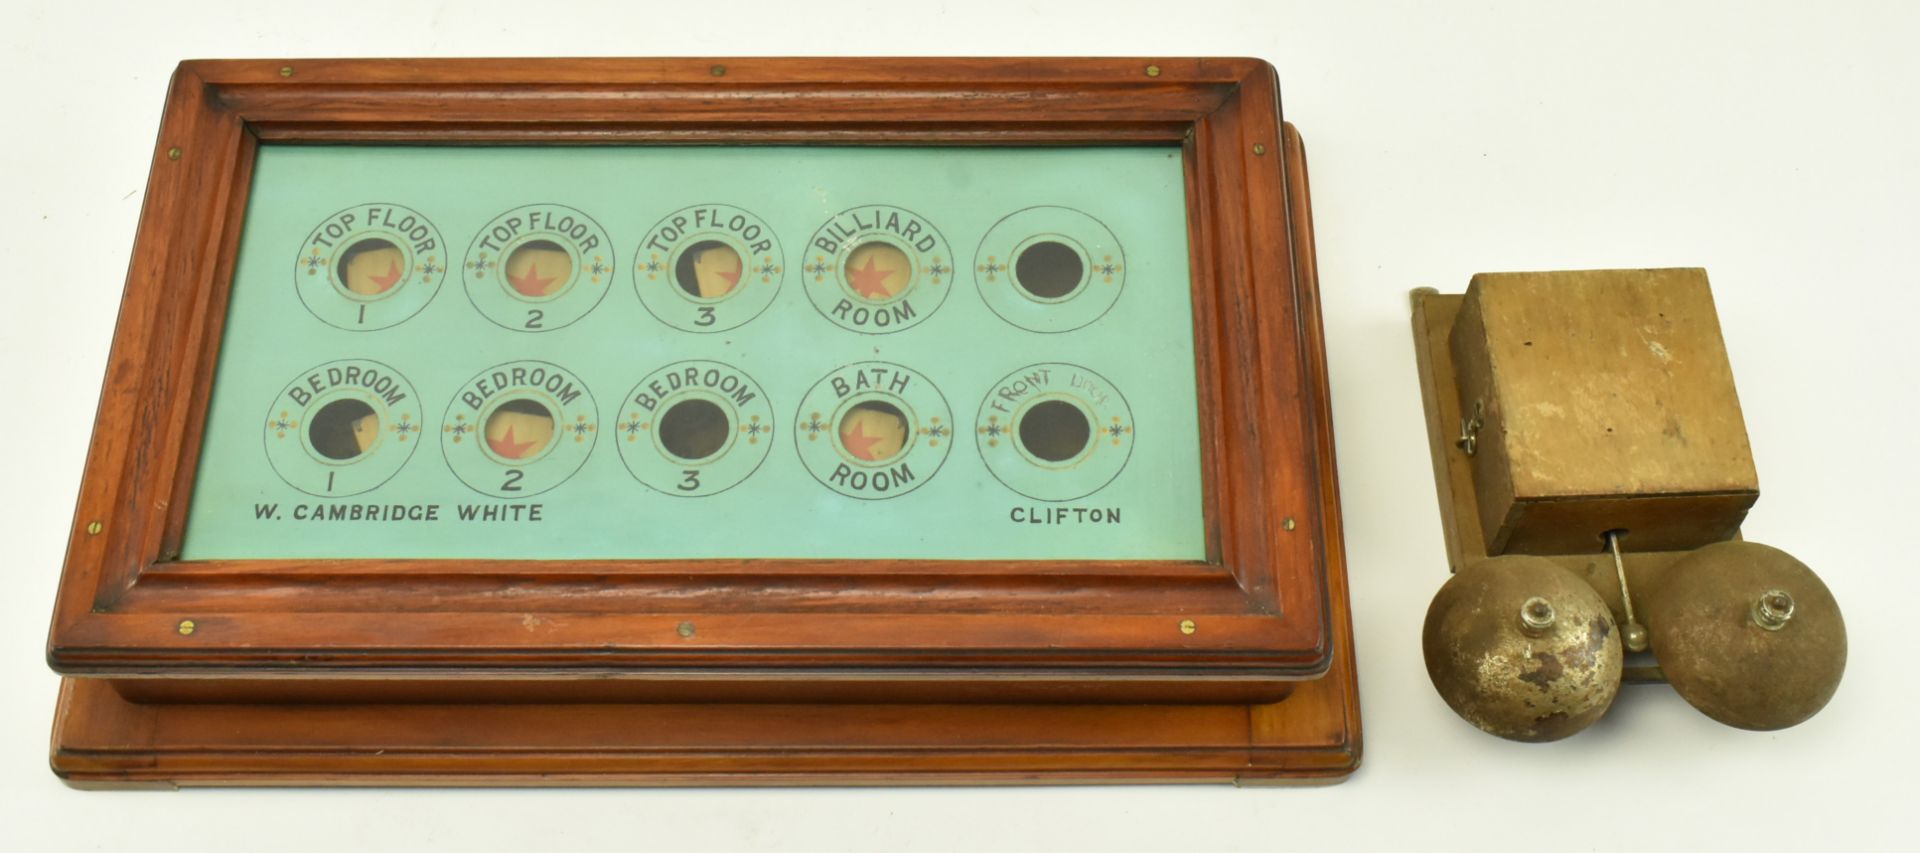 W. CAMBRIDGE WHITE OF CLIFTON - EDWARDIAN BELL INDICATOR BOARD